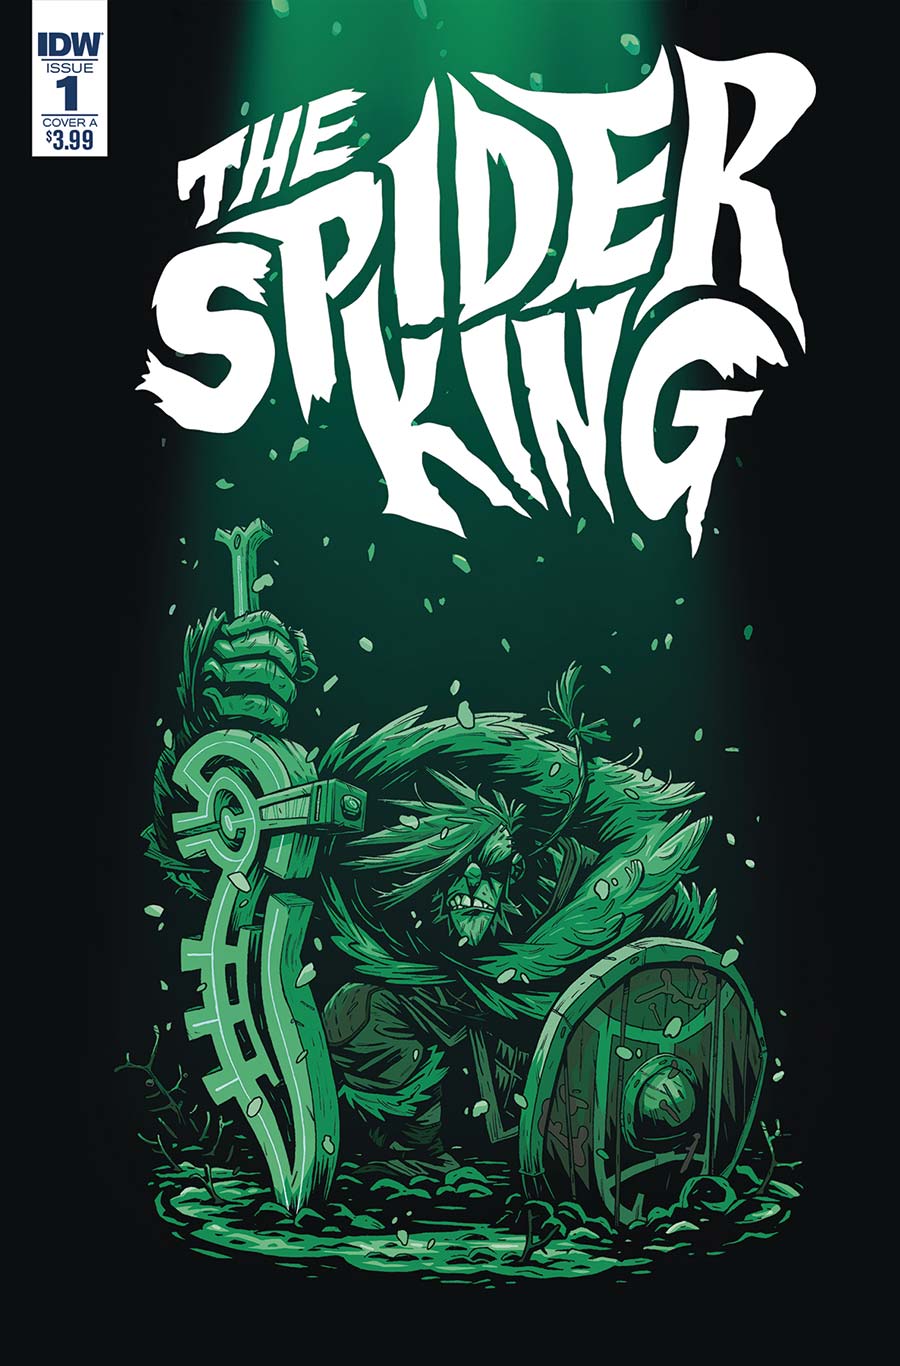 The Spider King